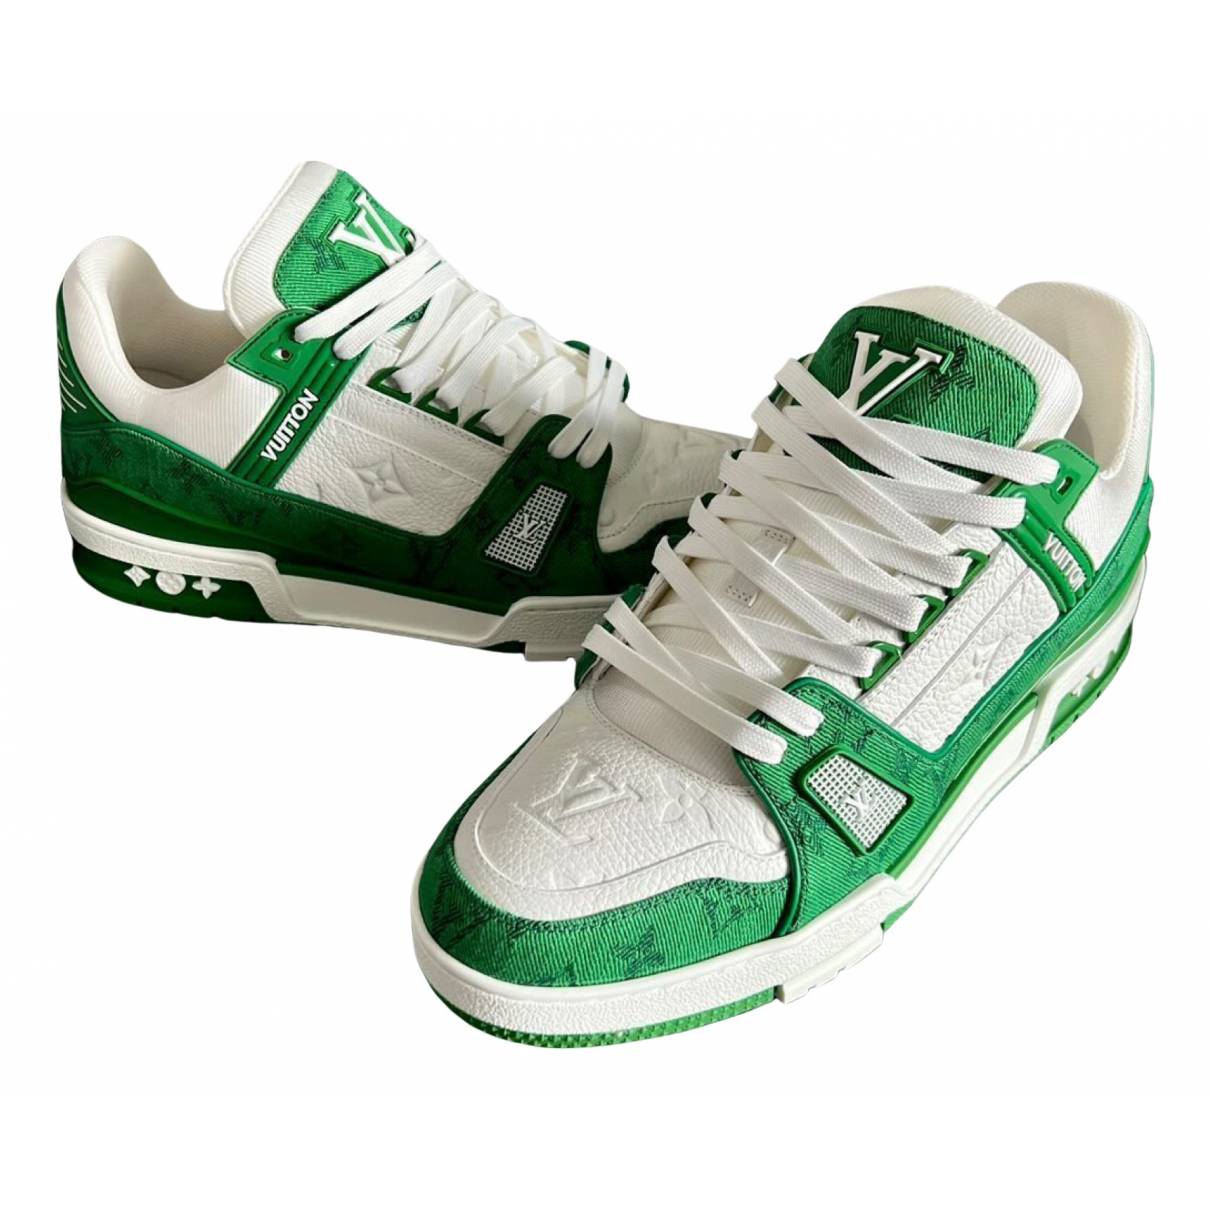 Lv trainer leather low trainers Louis Vuitton Green size 40.5 EU